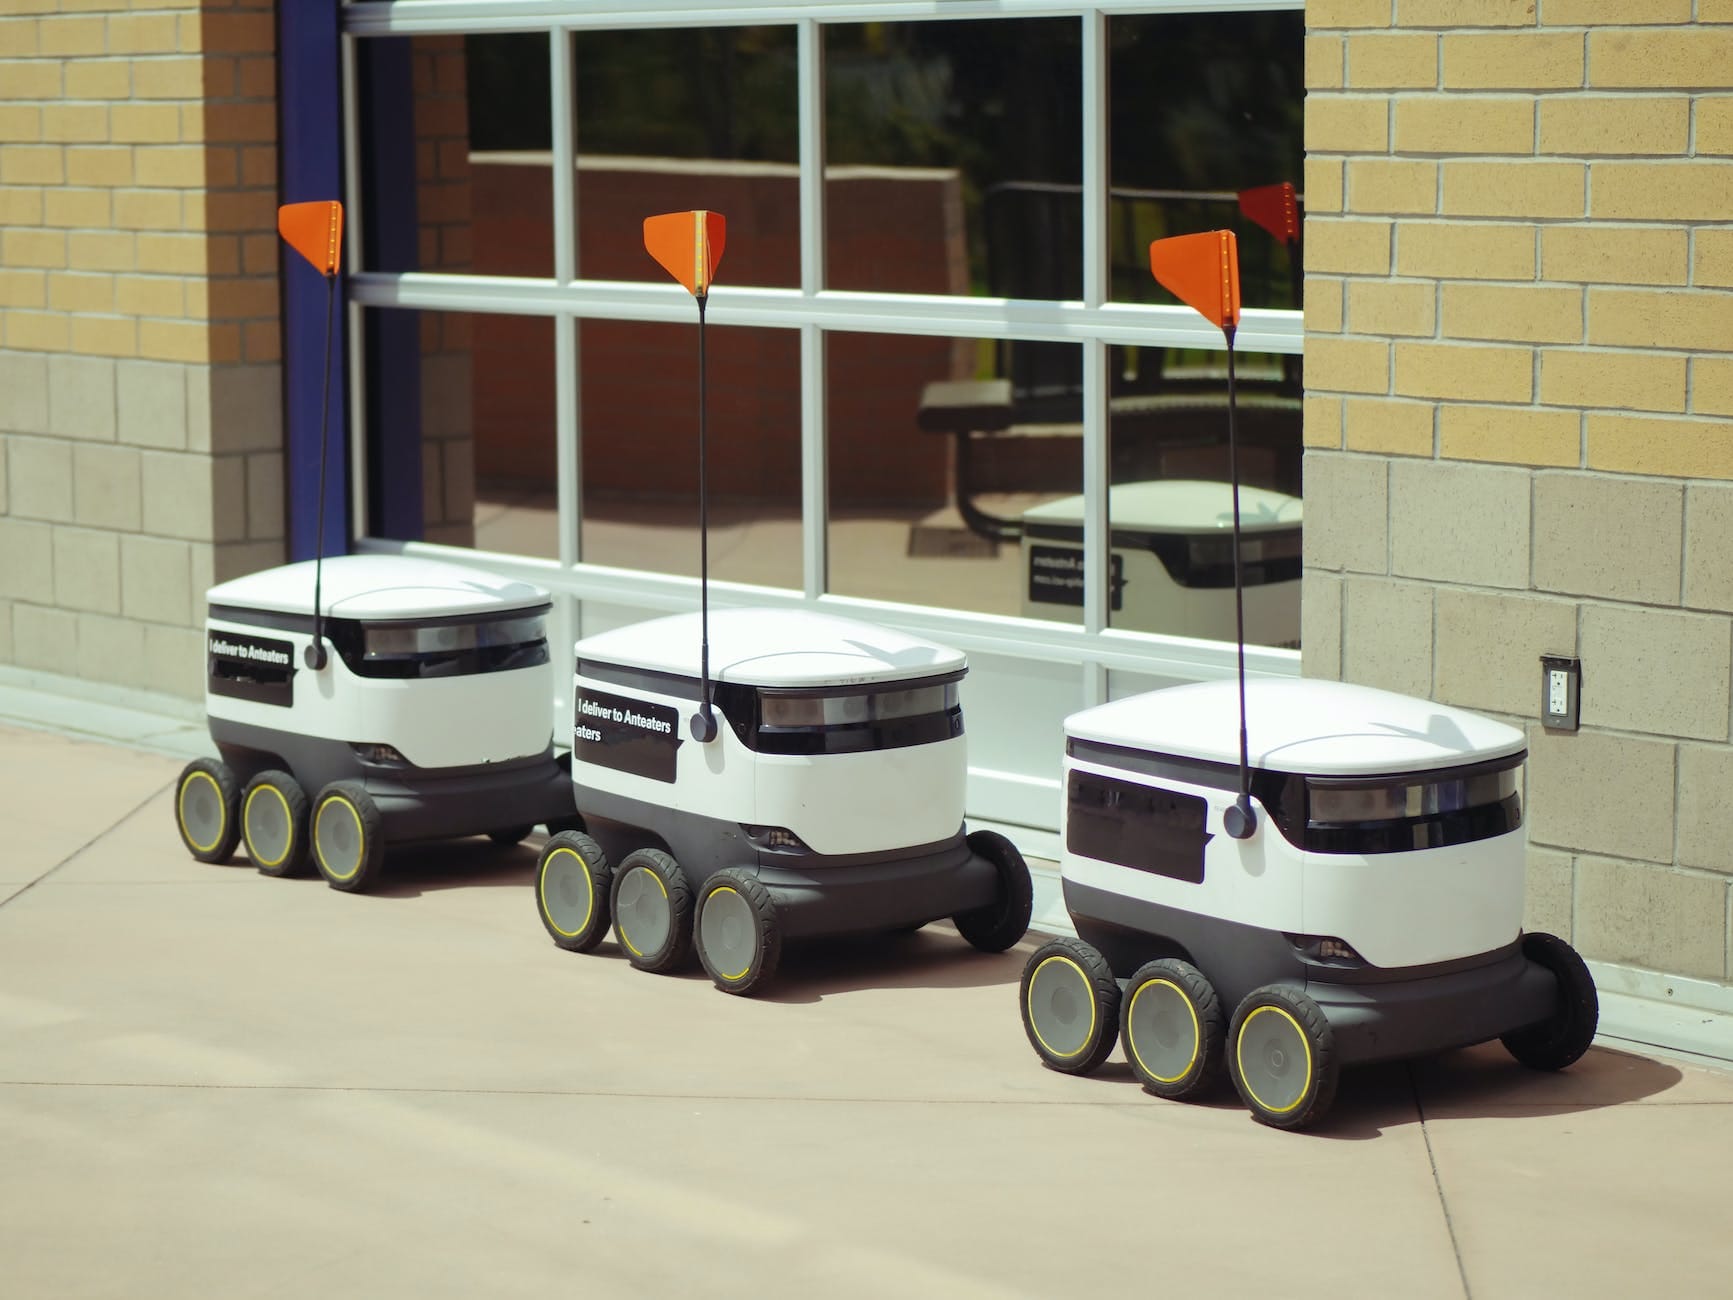 delivery robots parked beside glass window